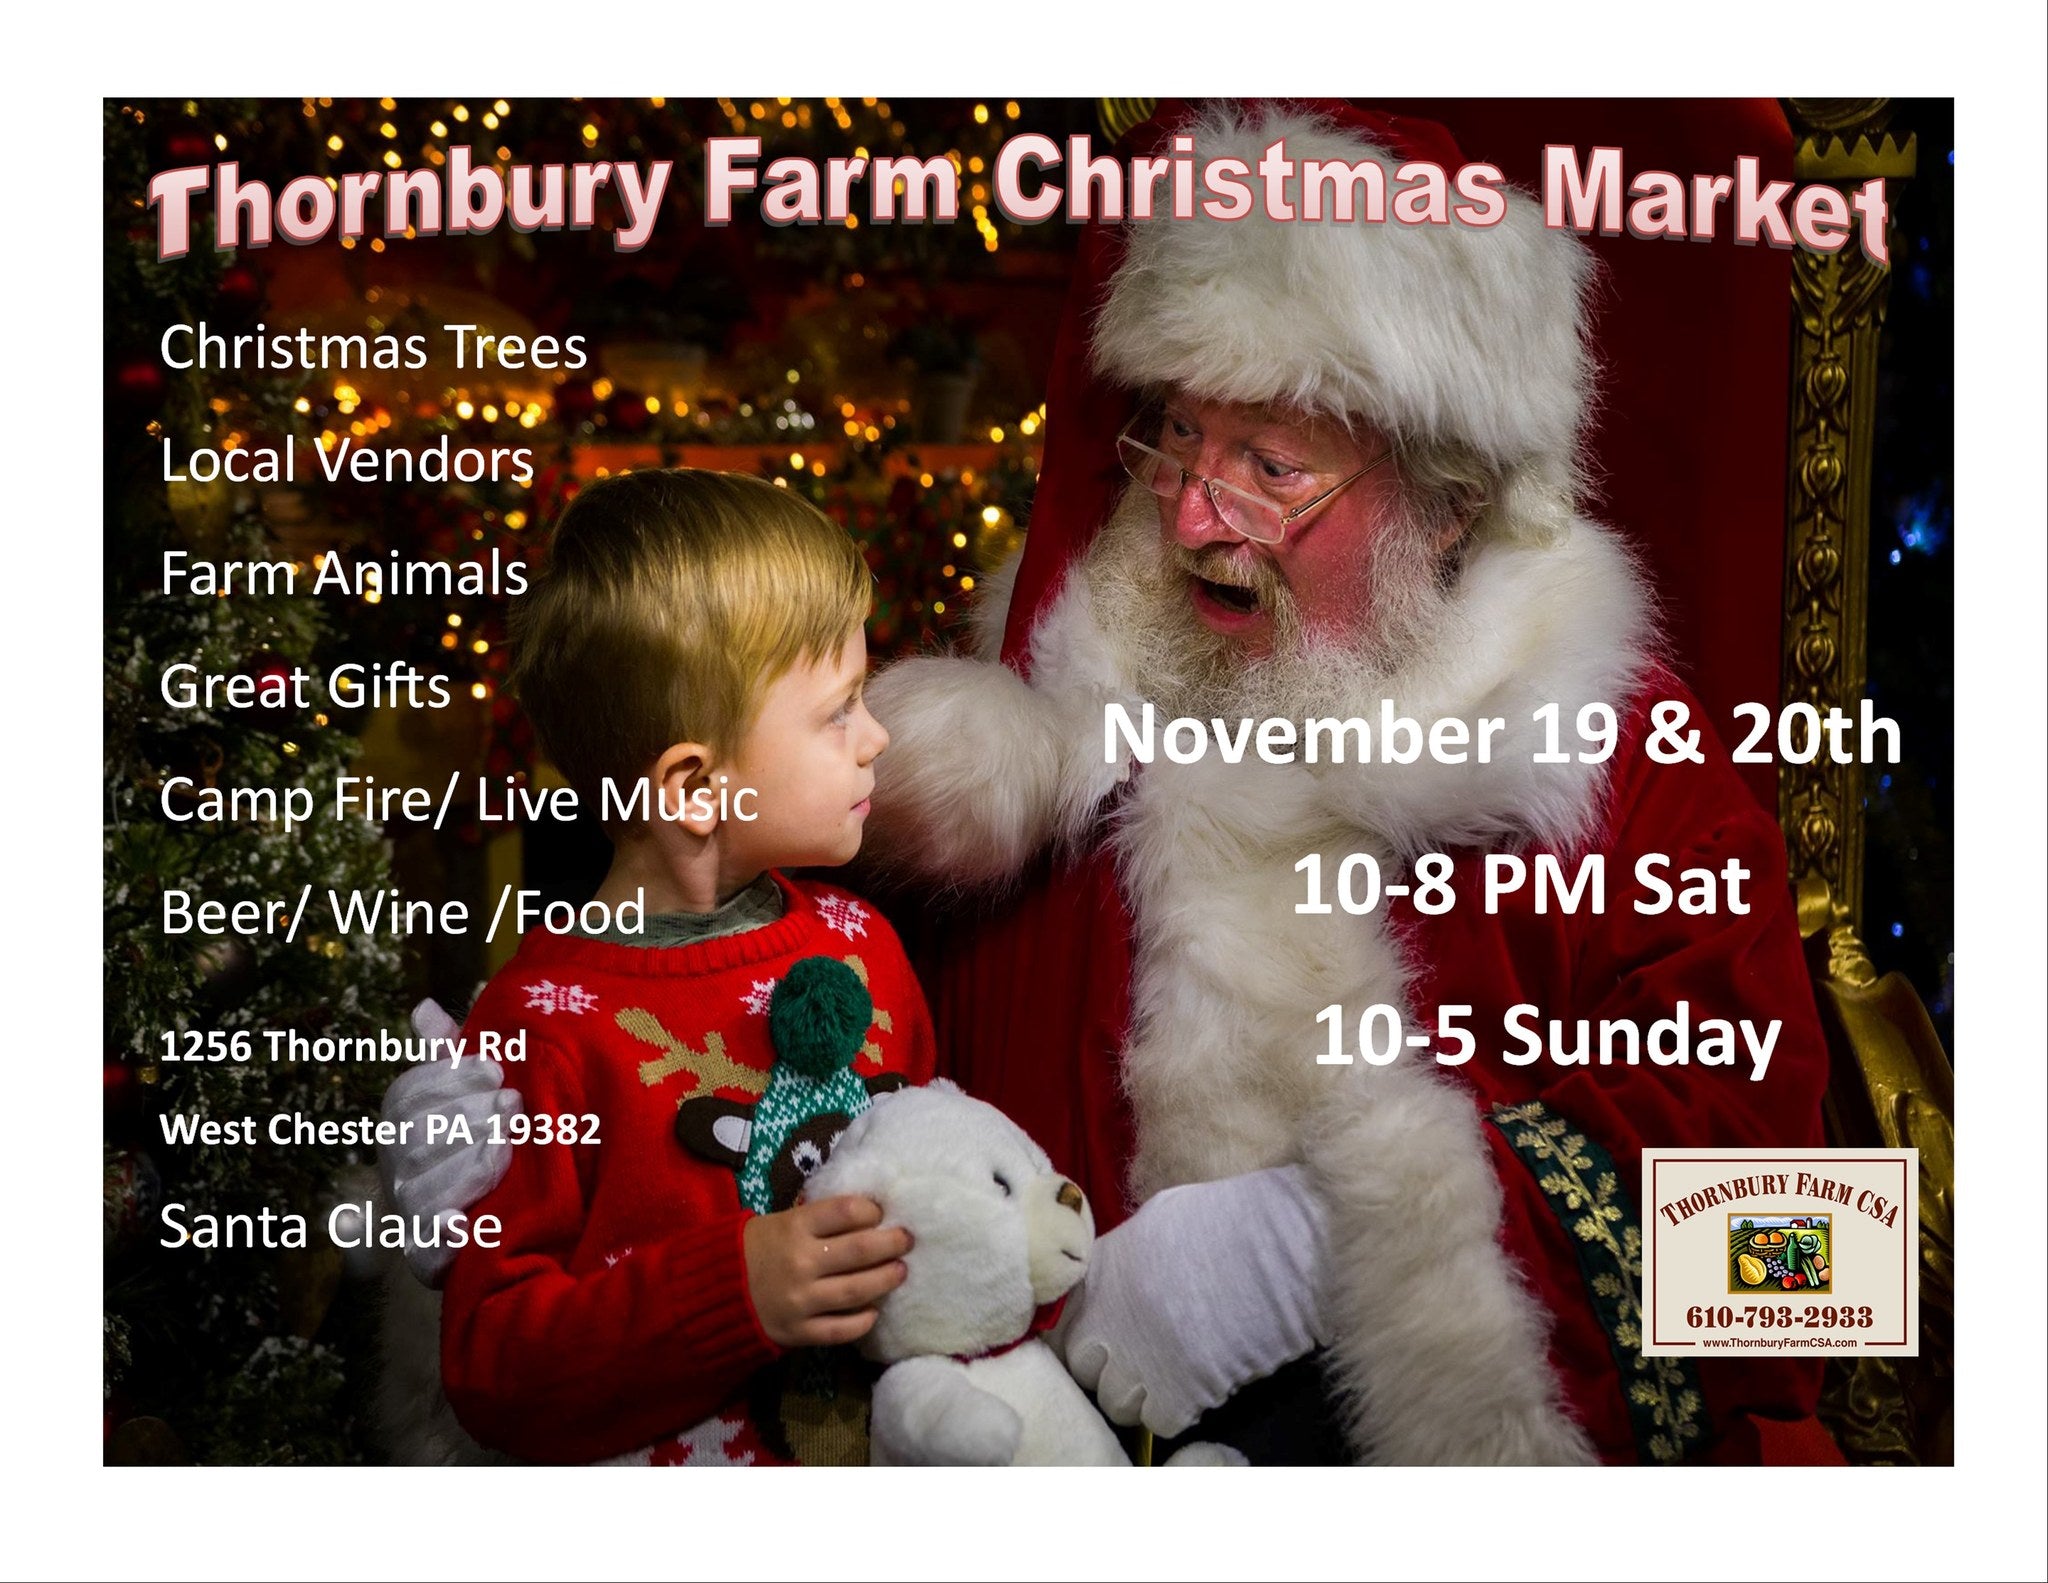 Fat Cow Jerky will be at the Christmas Village at Thornbury Farm